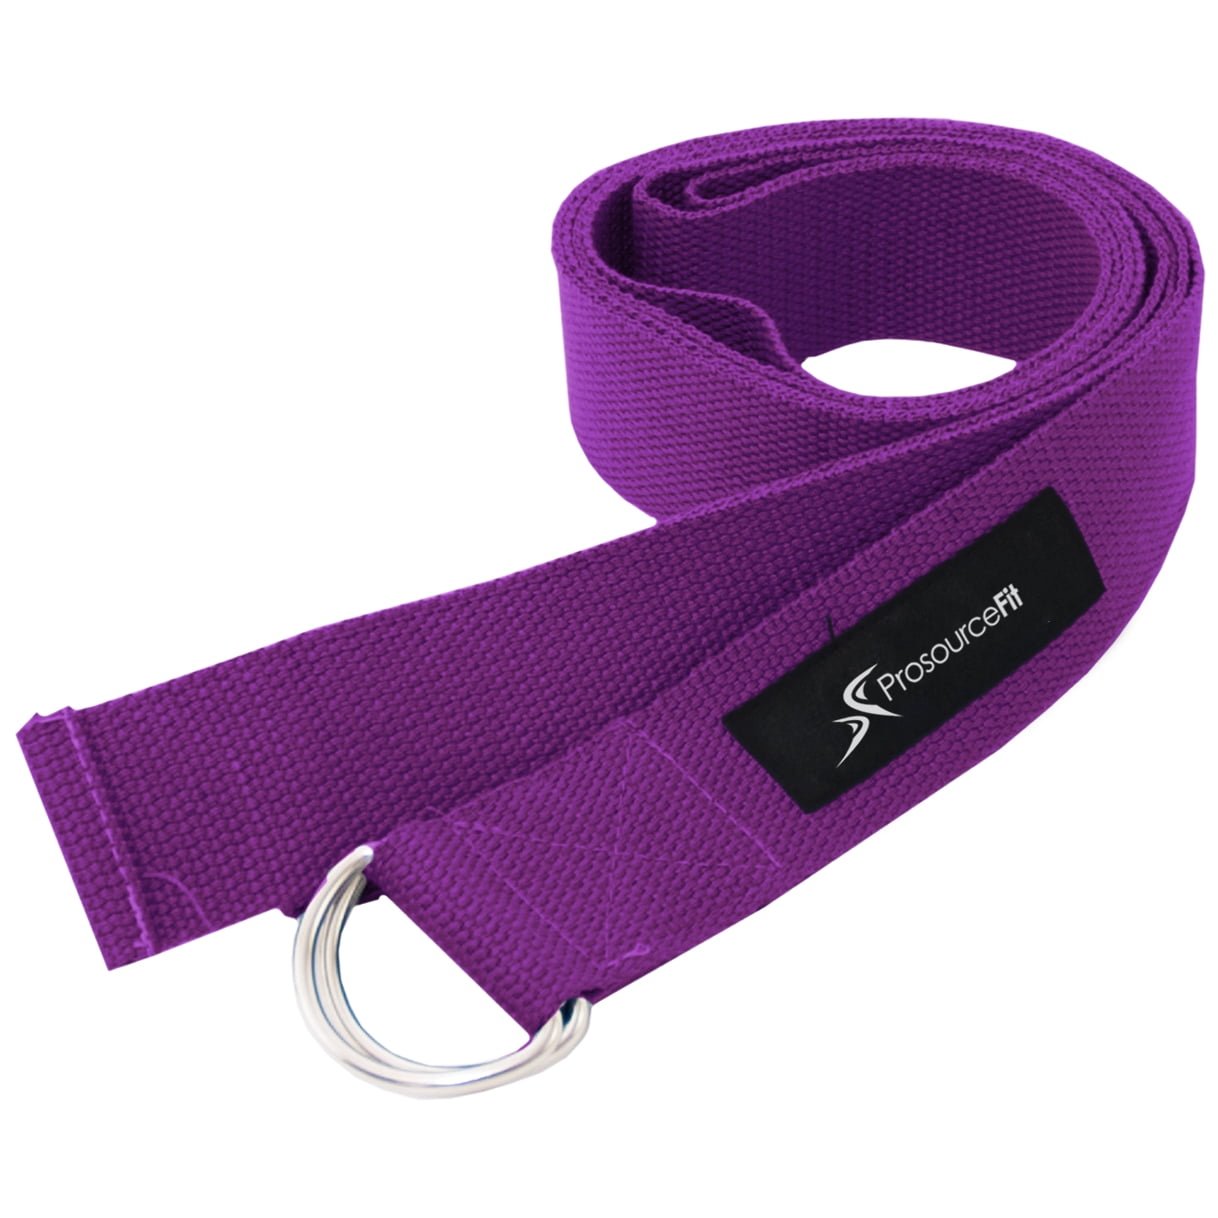 ProsourceFit Metal D-Ring 8 Ft Yoga Strap for Support & Stretching